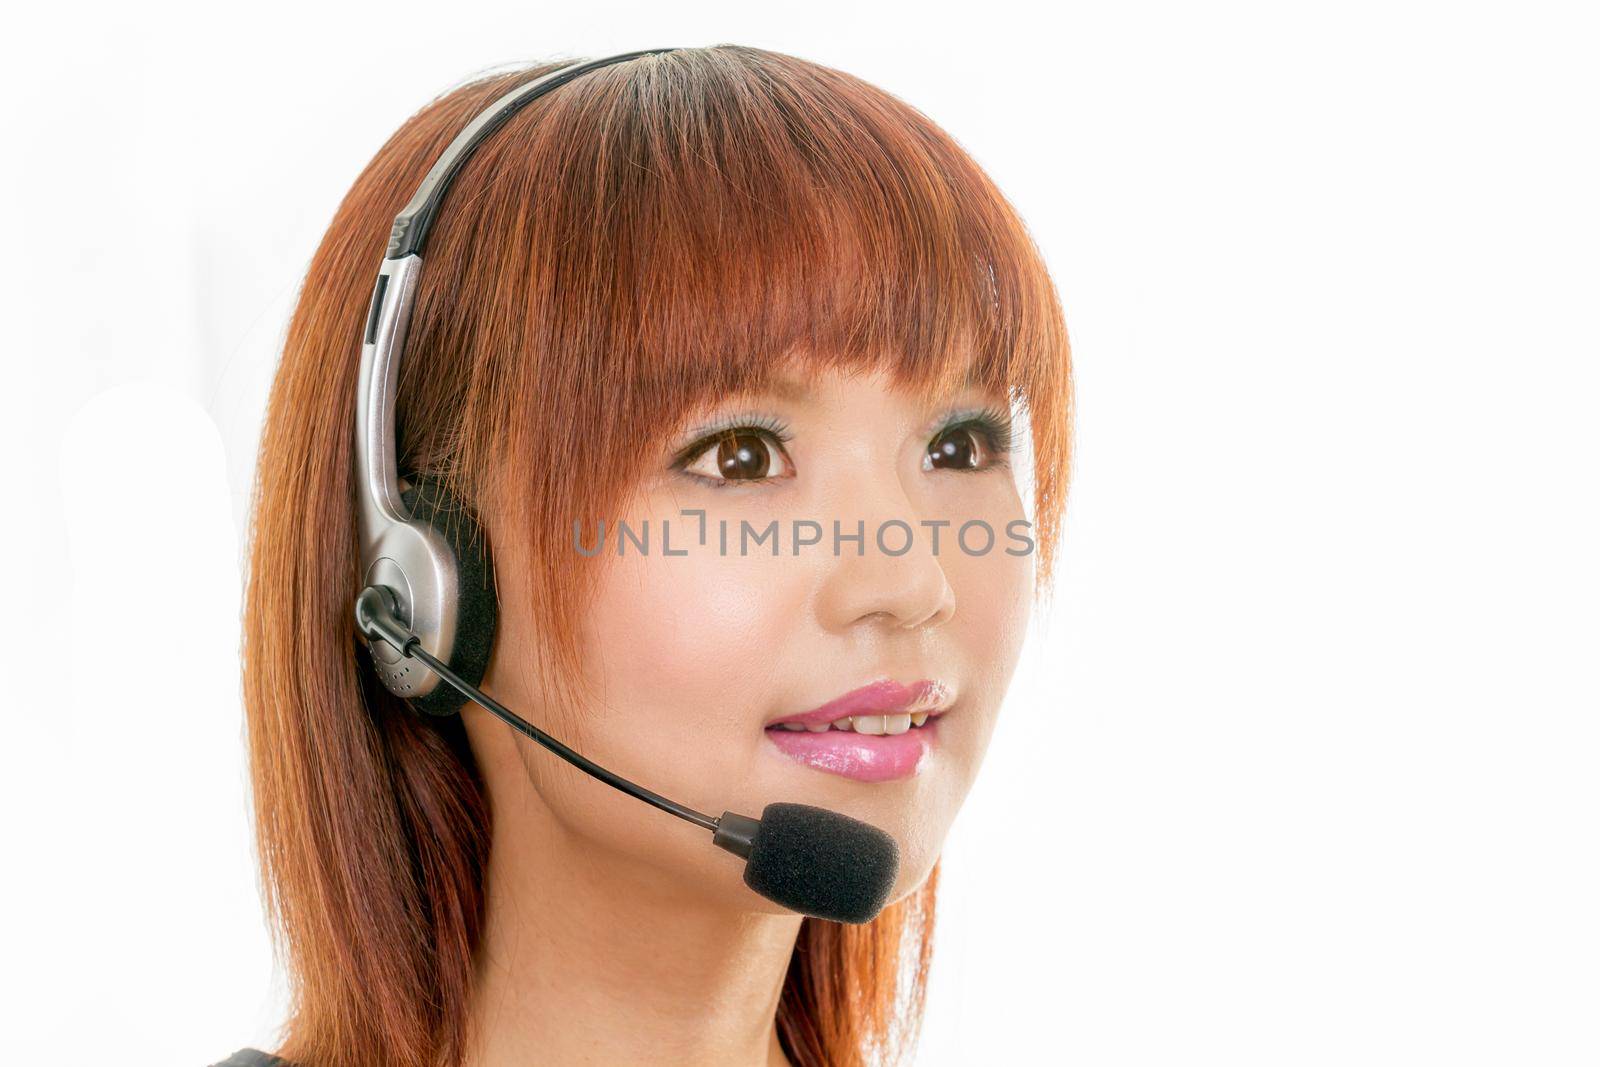 Woman with headset by imagesbykenny